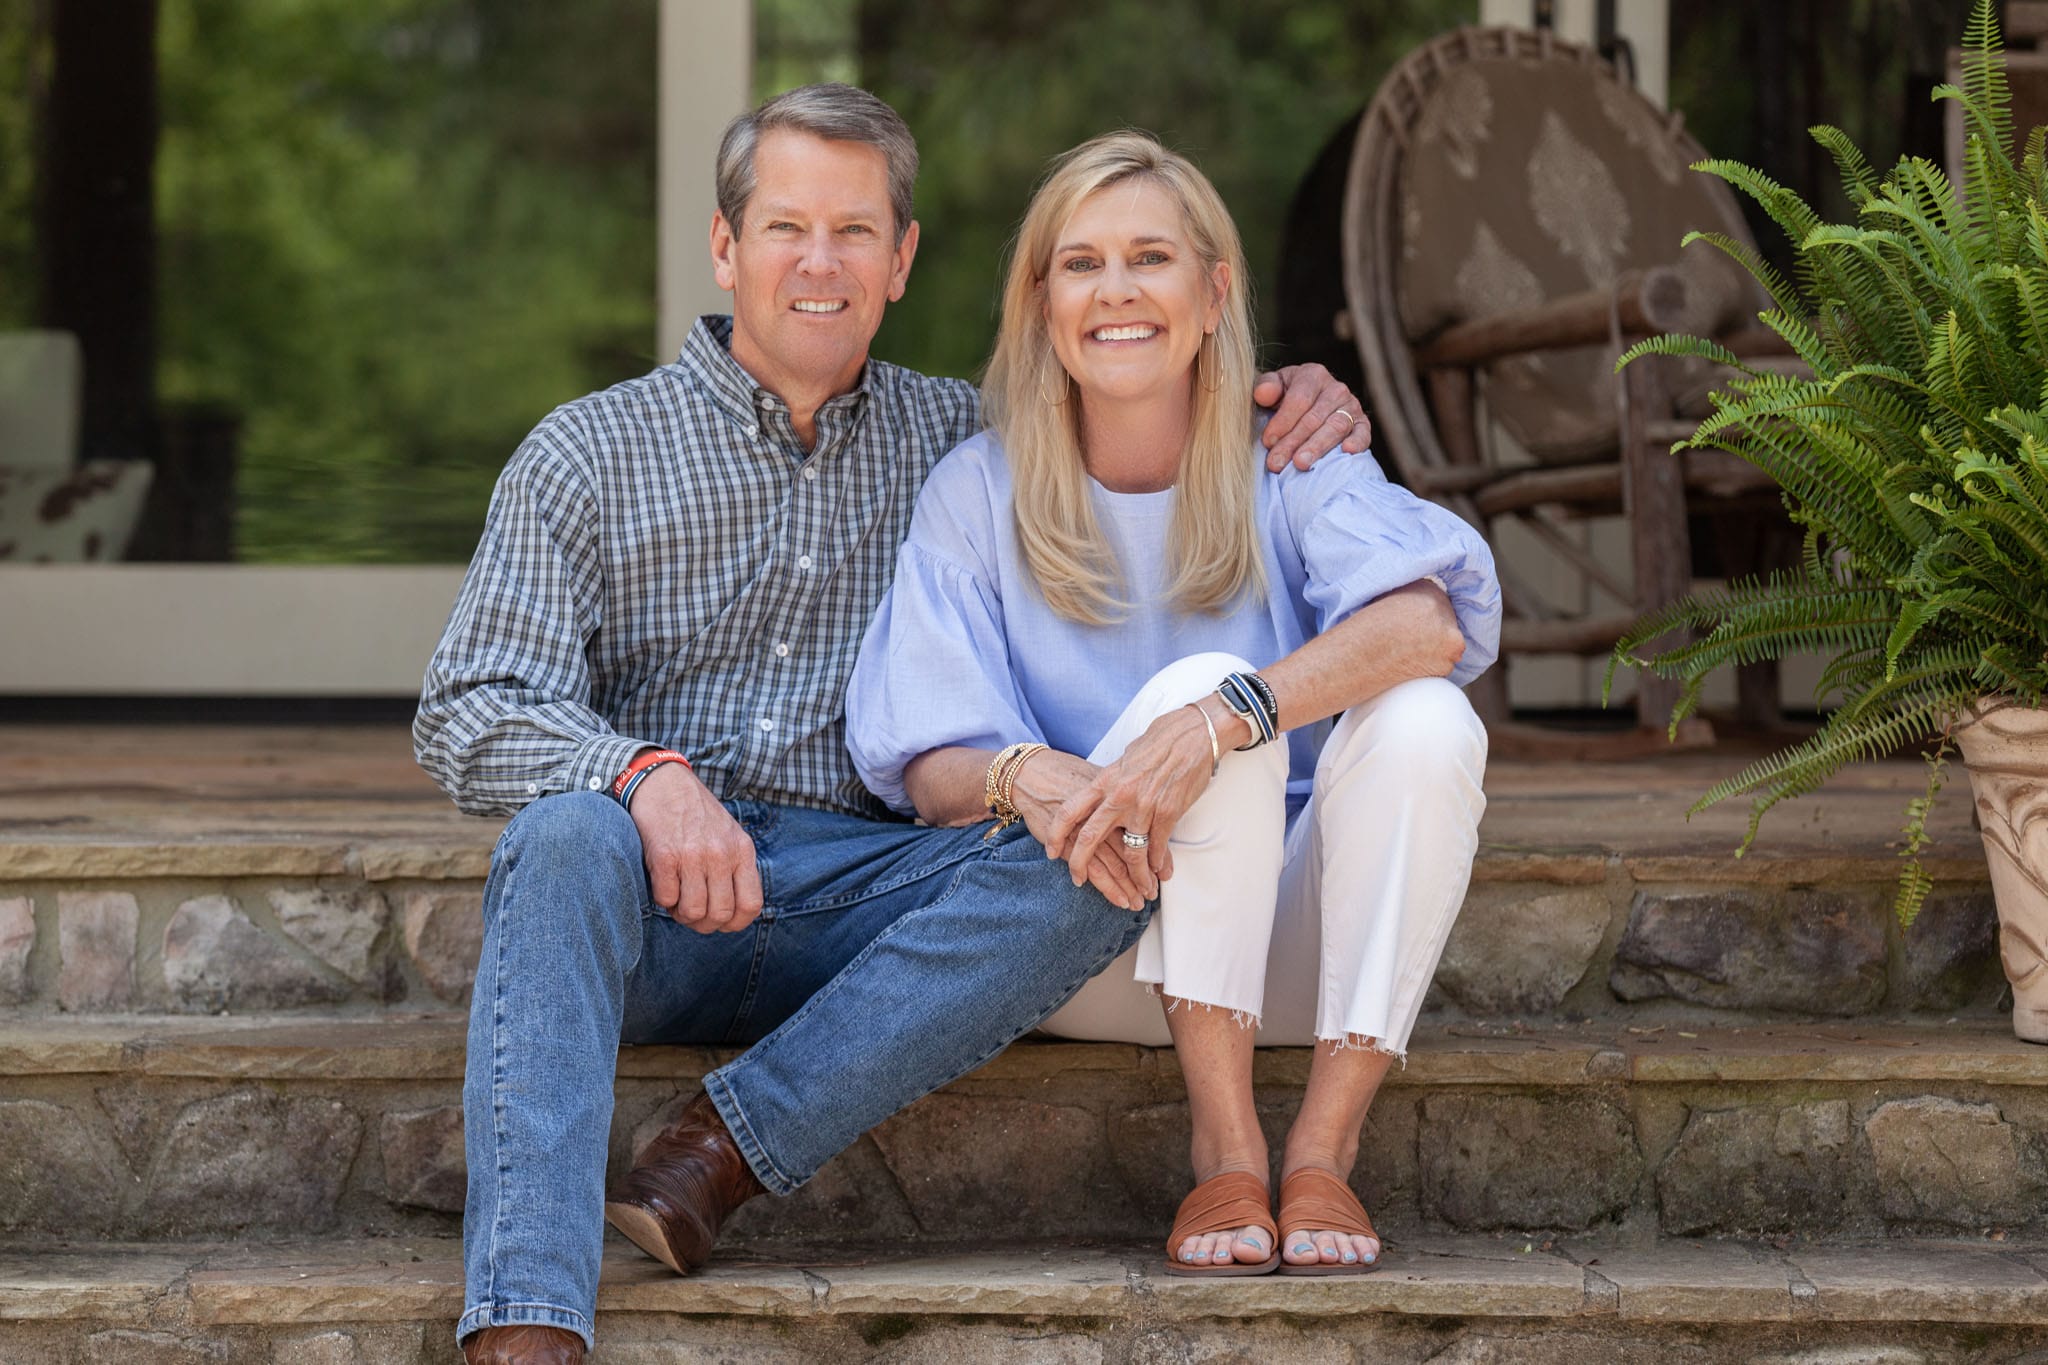 Georgia Governor Brian Kemp and First Lady, Marty Kemp, sitting sit by side, smiling, on the steps of their home in Athens, Georgia.